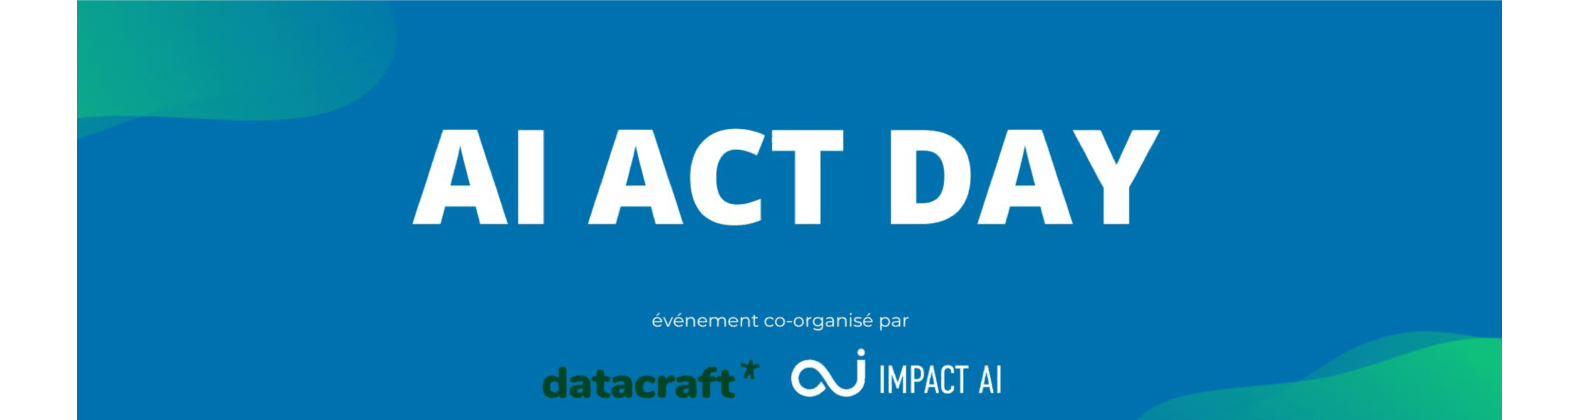 AIActDay4